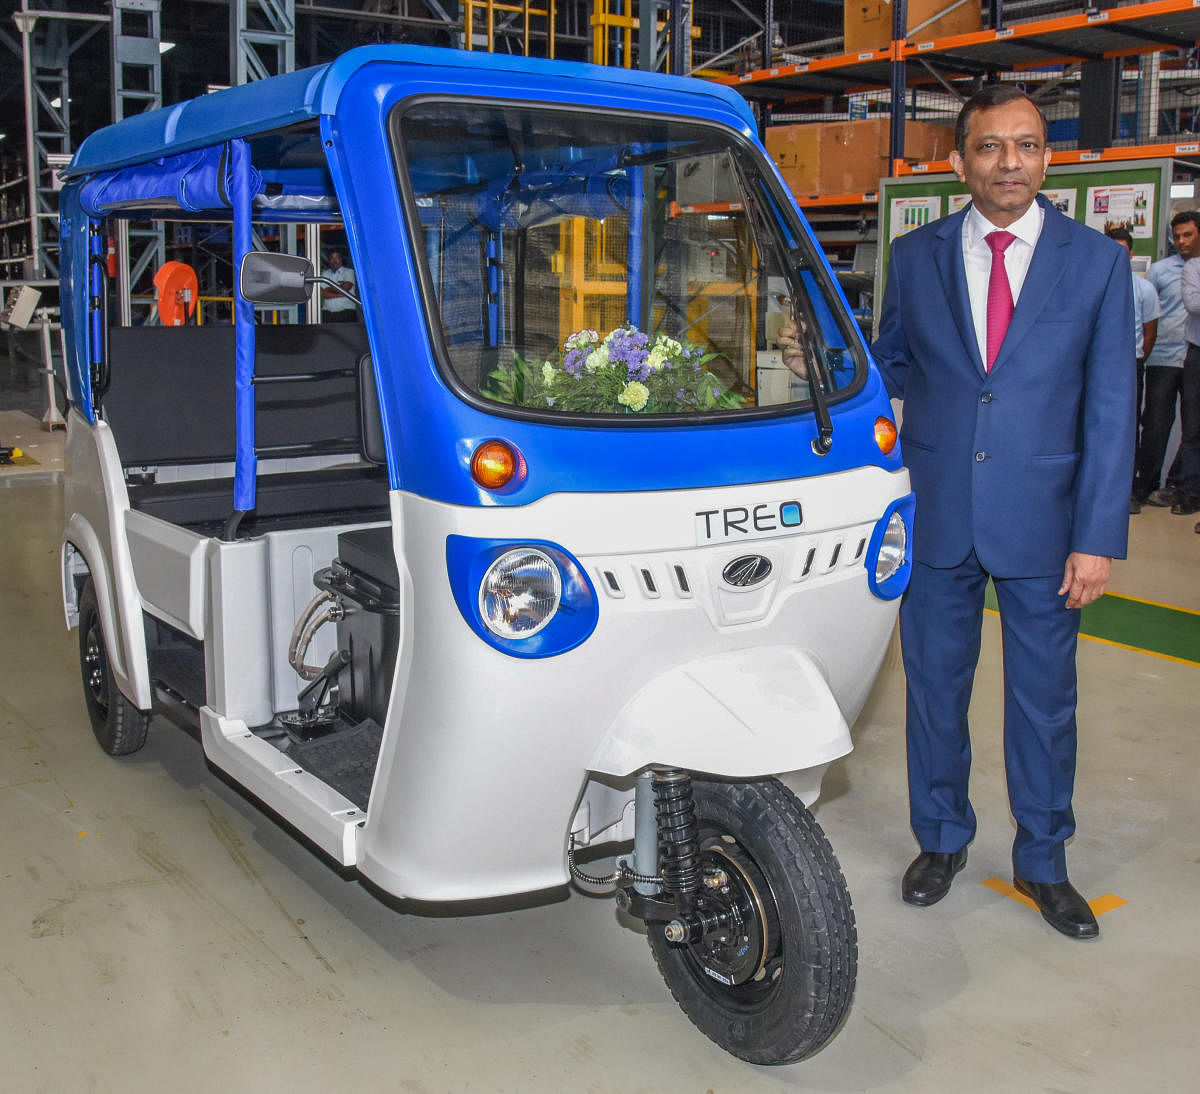 Pawan Goenka, Managing Director, Mahindra and Mahindra Ltd at Electric Technology Manufacturing Hub and Treo electric 3 Wheeler launch programme of Mahindra Electric Mobility Limited at Bomasandra in Bengaluru on Thursday. Photo by S K Dinesh